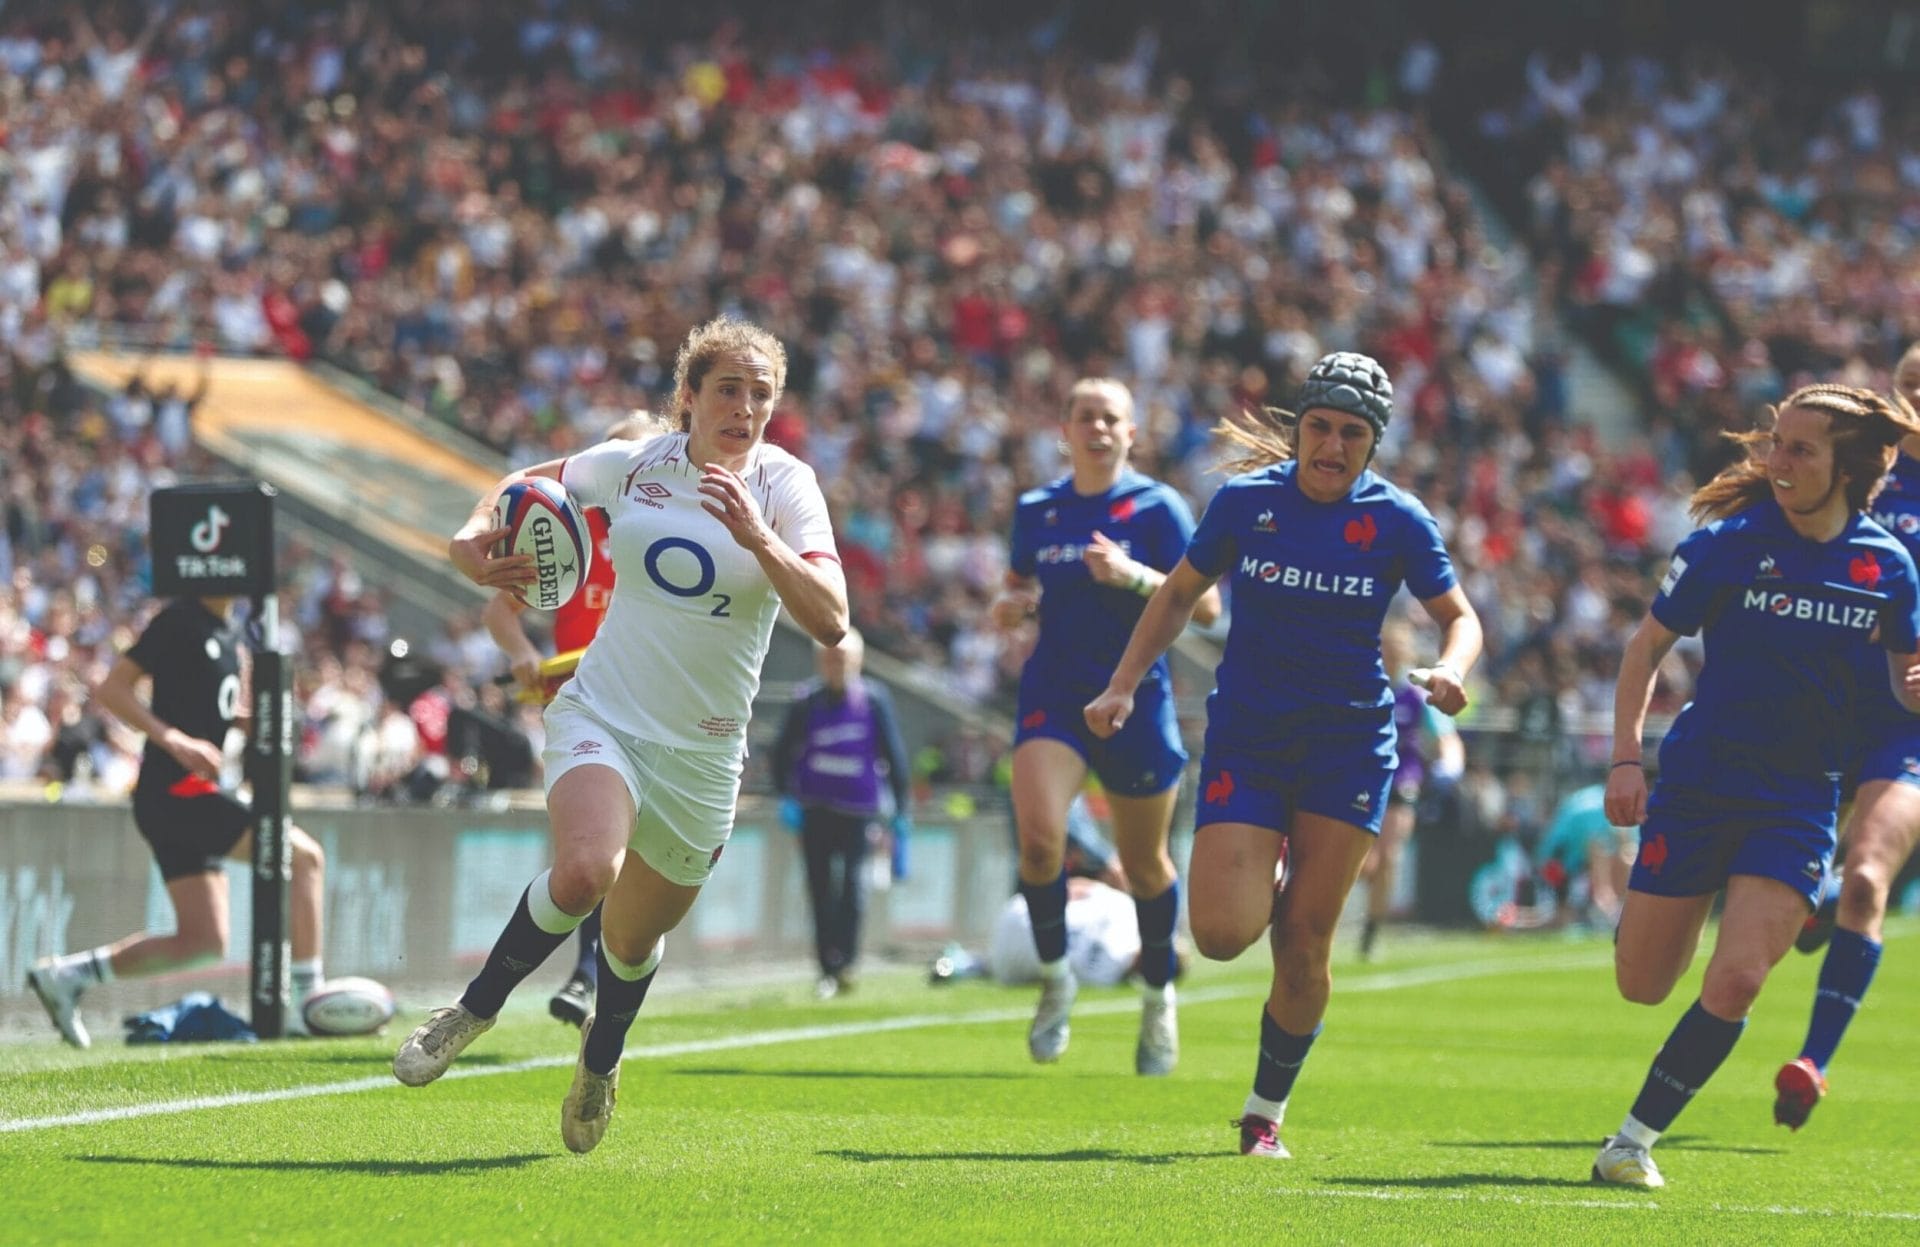 Abigail Dow of England breaks clear to score the team’s first try during the Women’s Six Nations match against France, 29th April 2023. The game was played in front of a record crowd of 58,498 at Twickenham Stadium